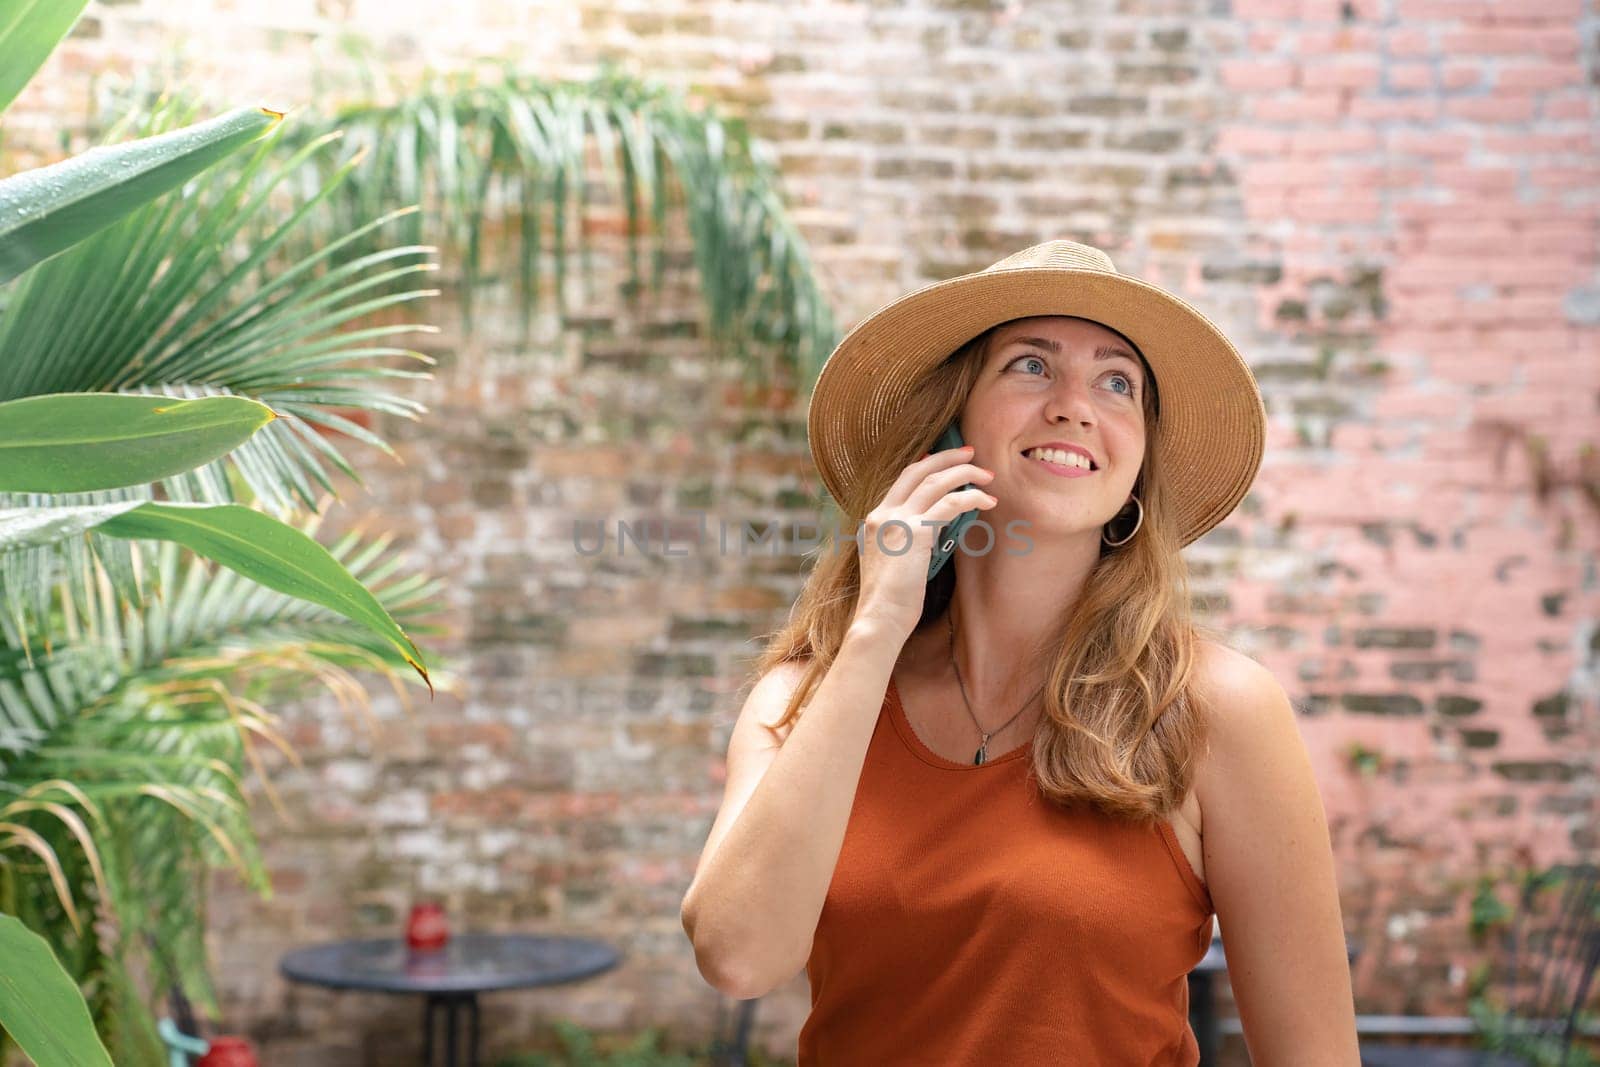 Happy woman in a sun hat smiling while talking on a cellphone by PaulCarr